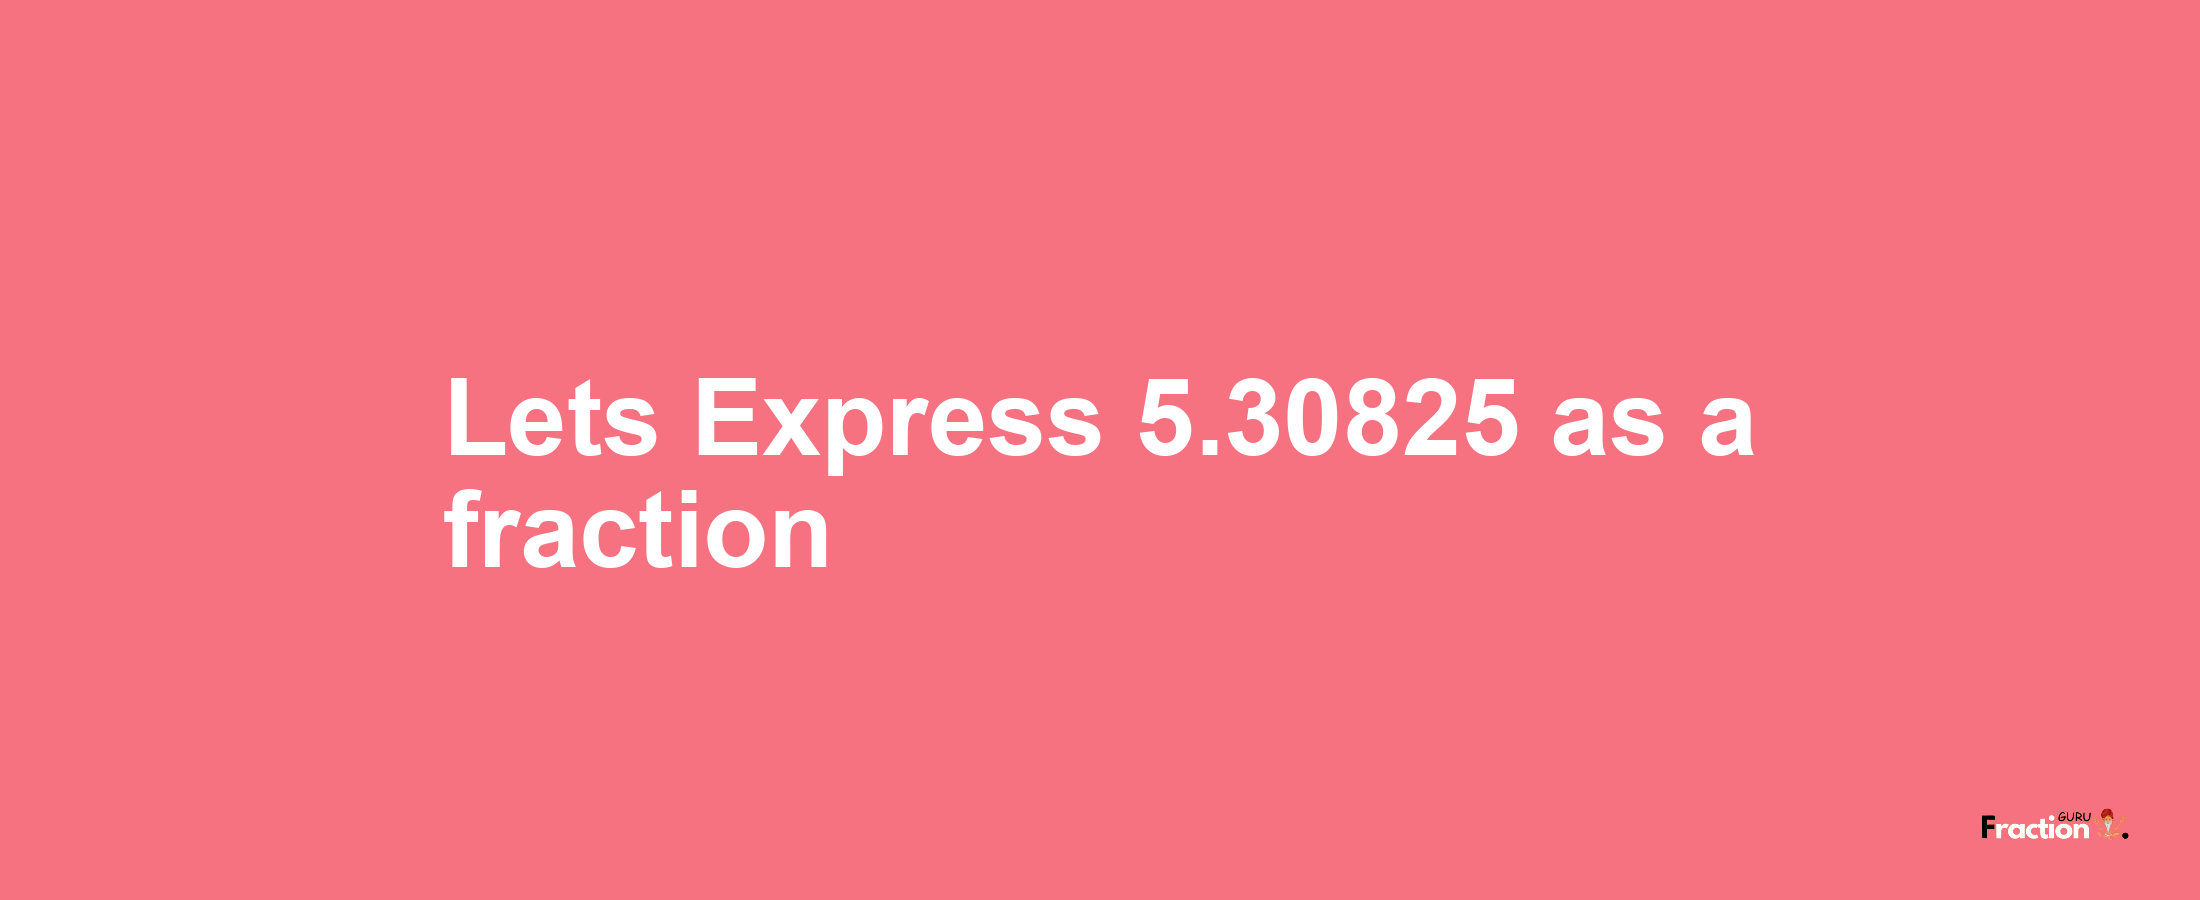 Lets Express 5.30825 as afraction